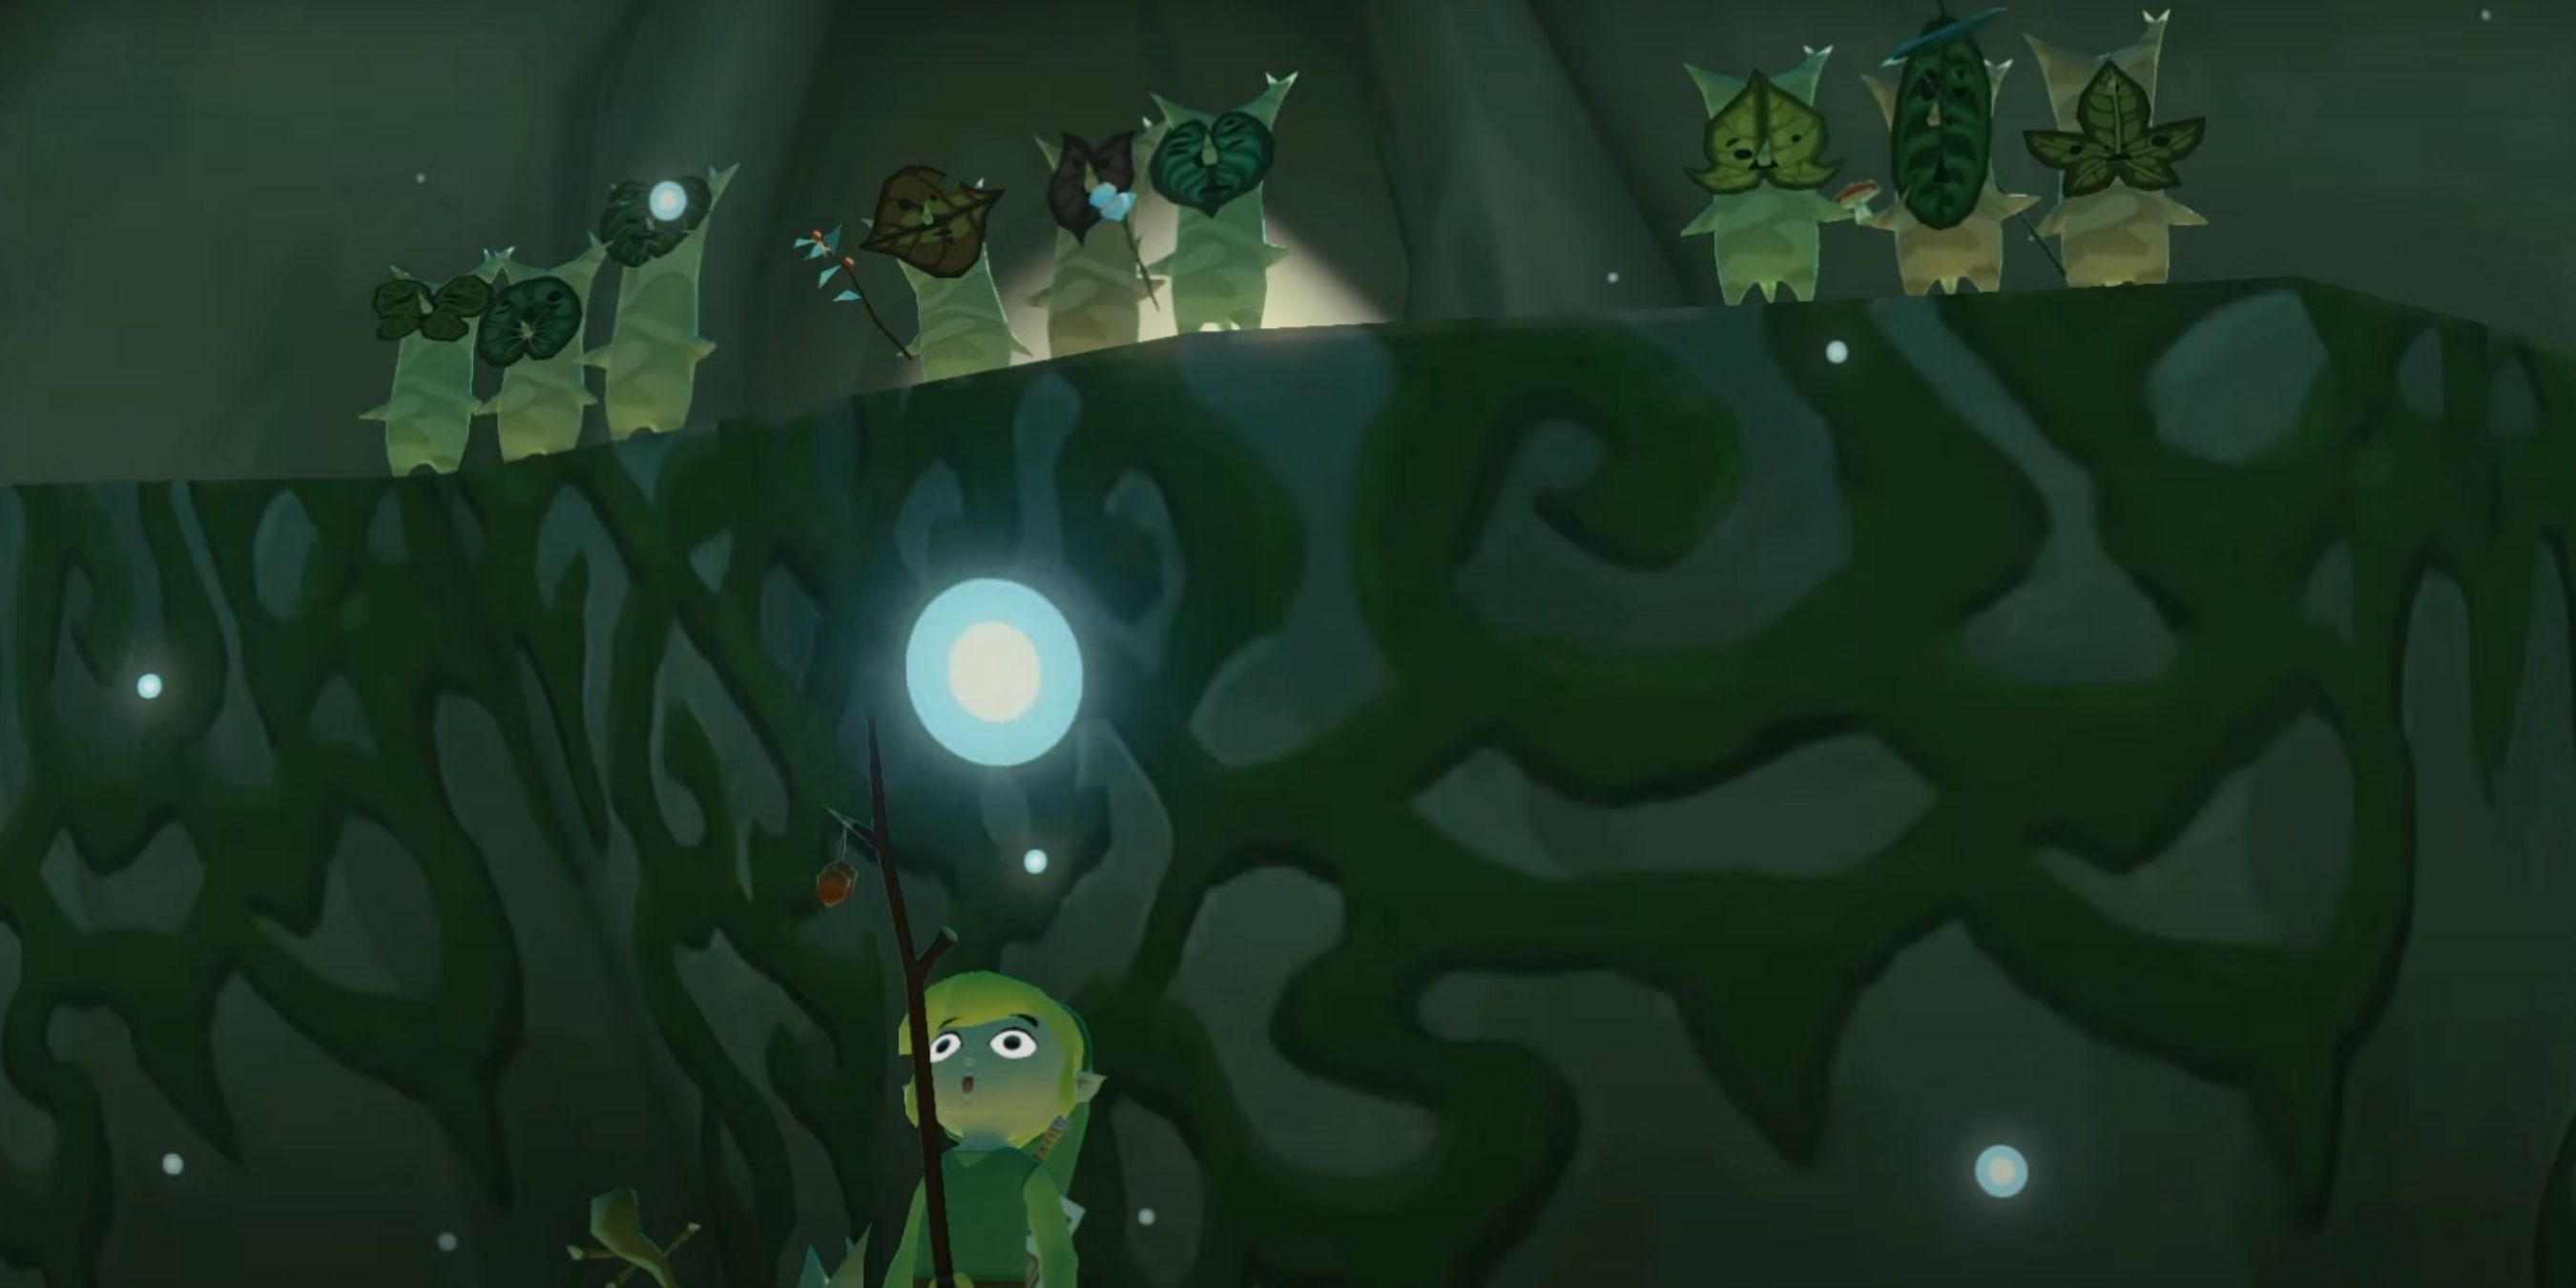 Toon Link with his eyes wide open while a group of Koroks are celebrating behind him.